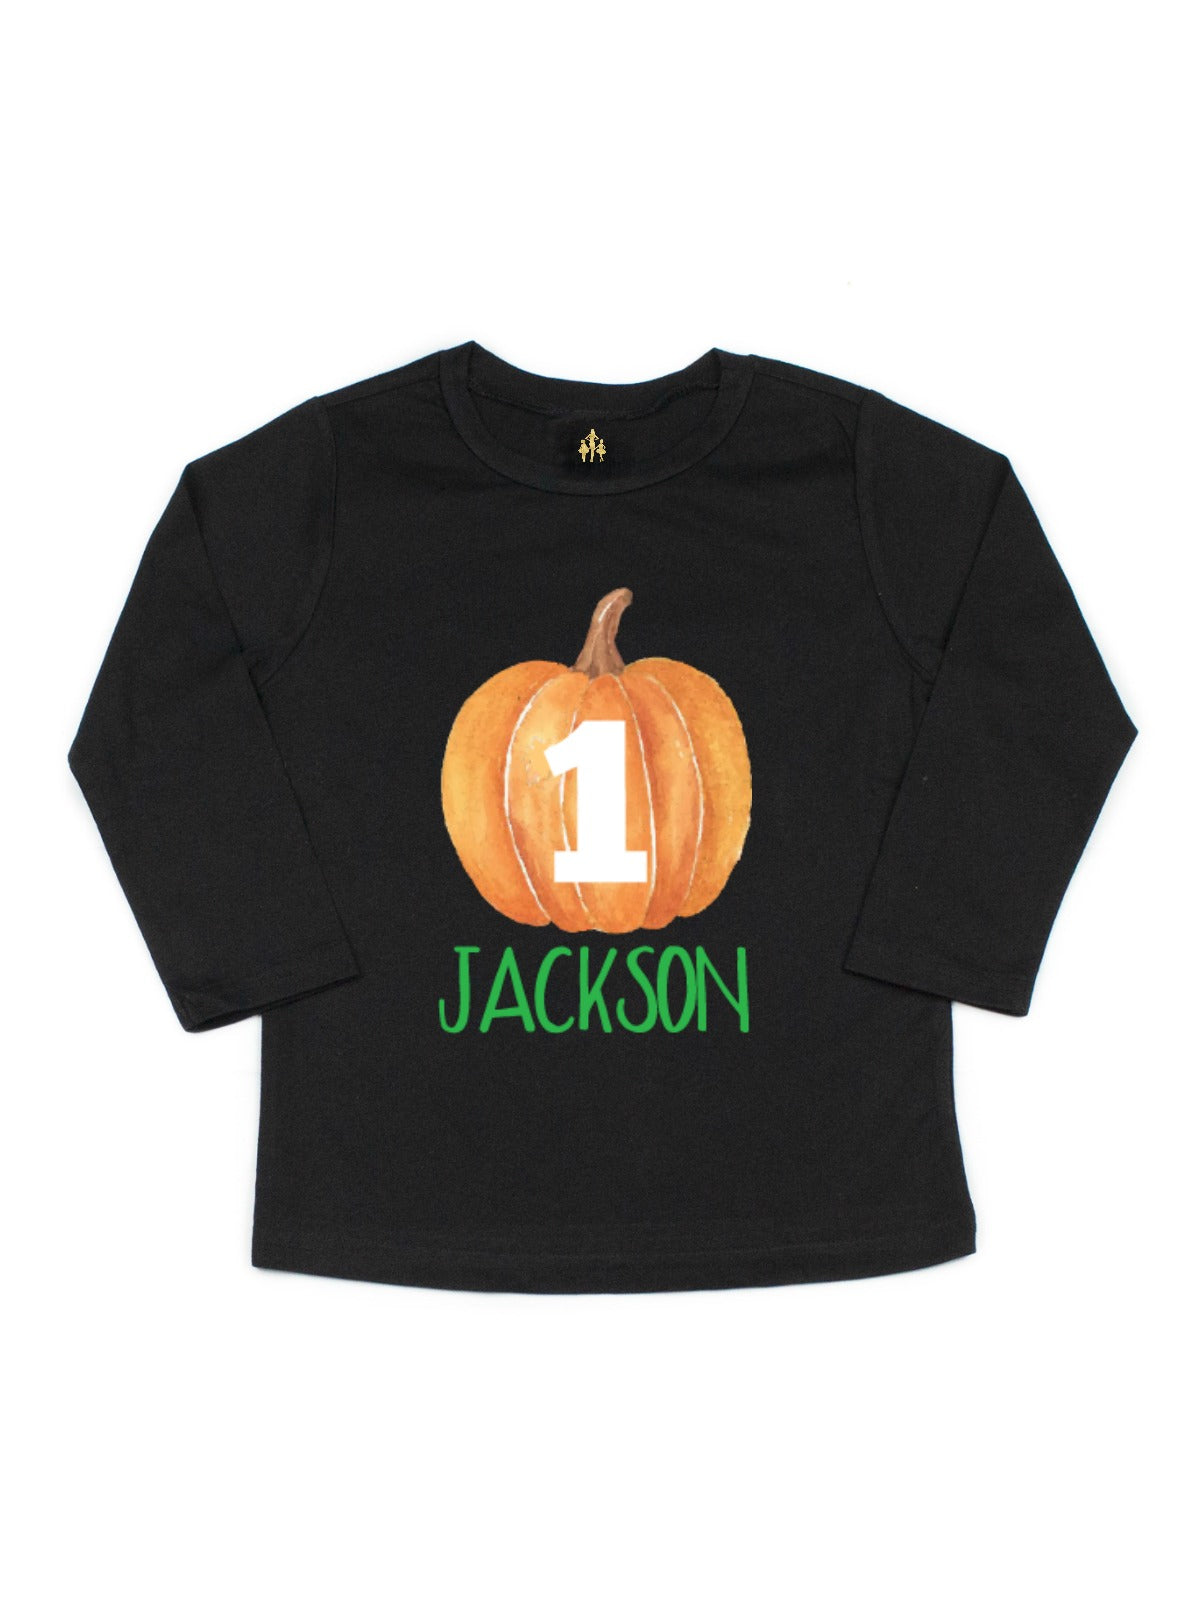 personalized name and age pumpkin birthday shirt